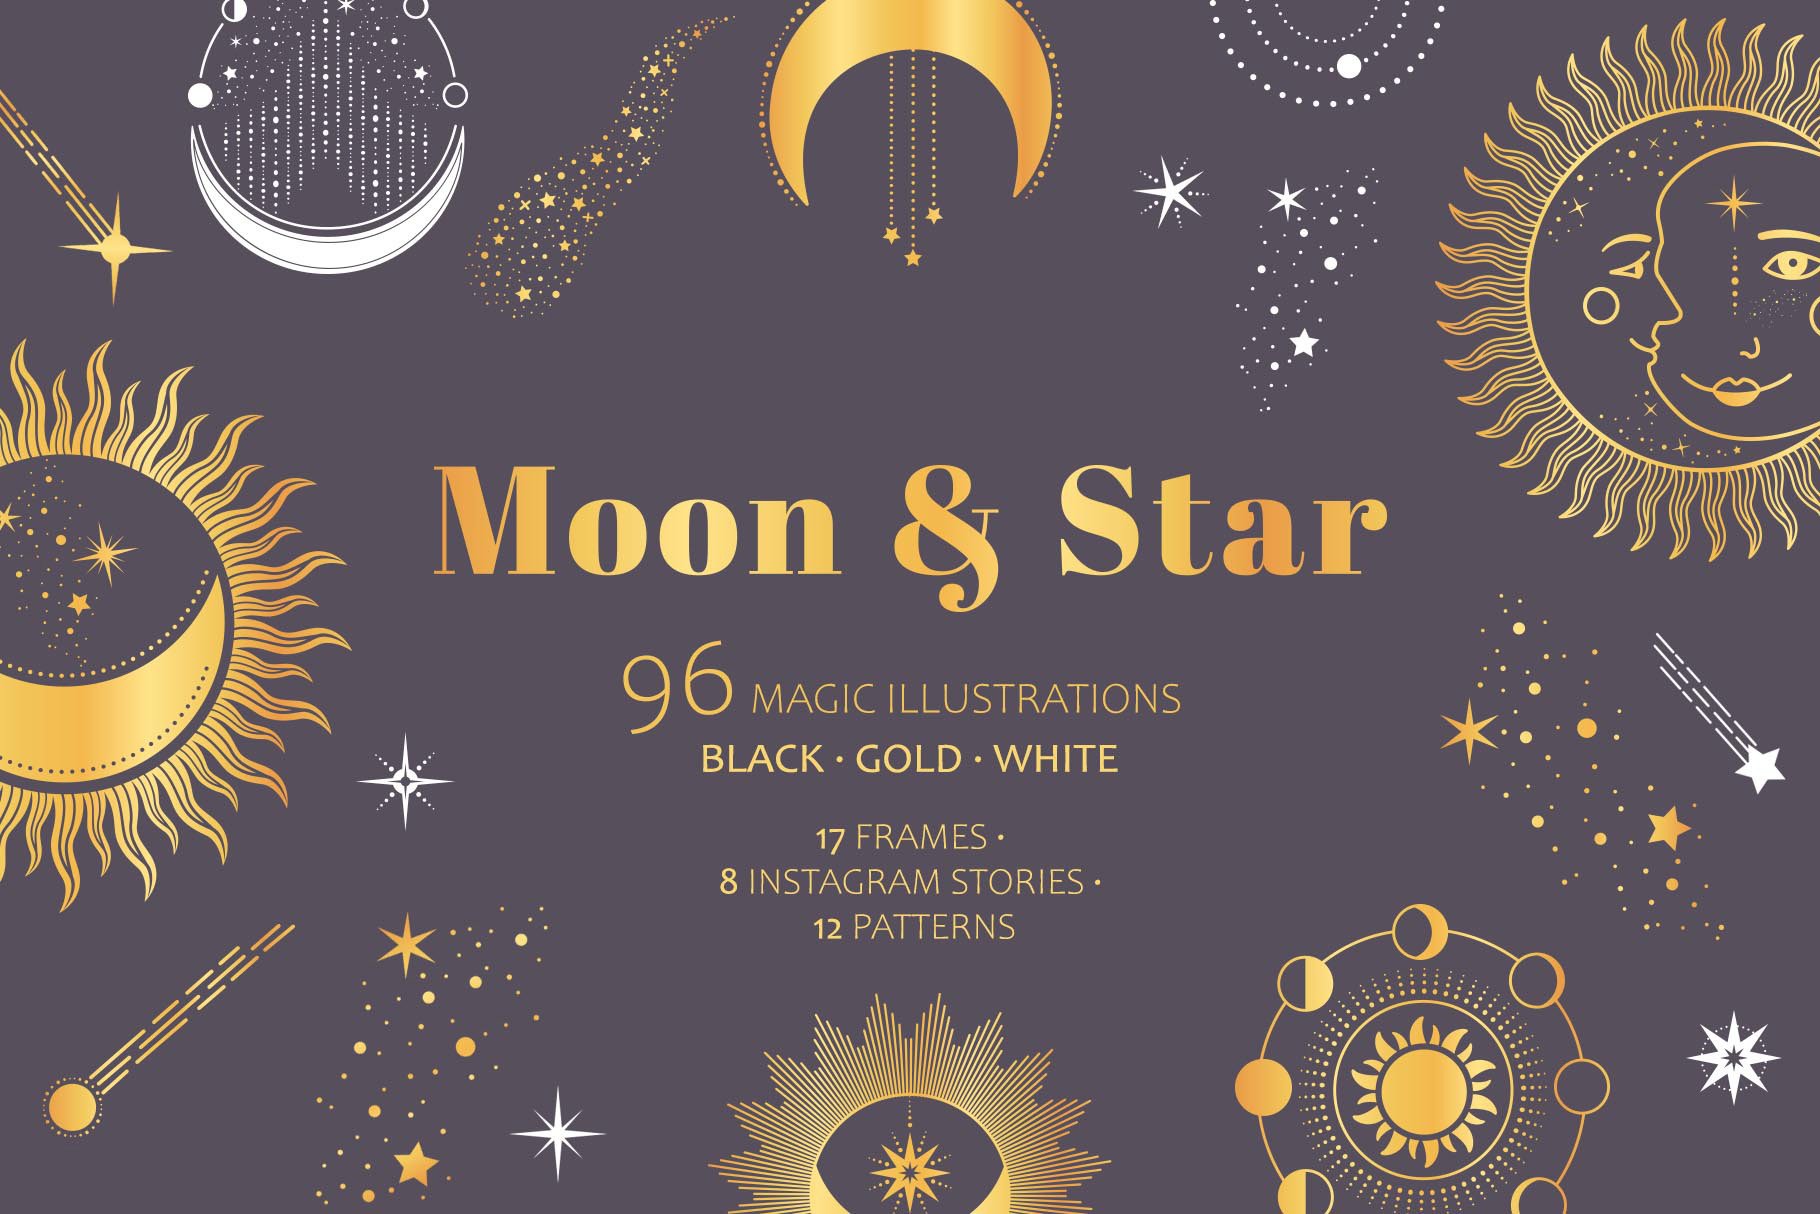 40+ CELESTIAL STARS AND ICONS ASSETS PACK VOL. 01 — The Visual Pharmacy